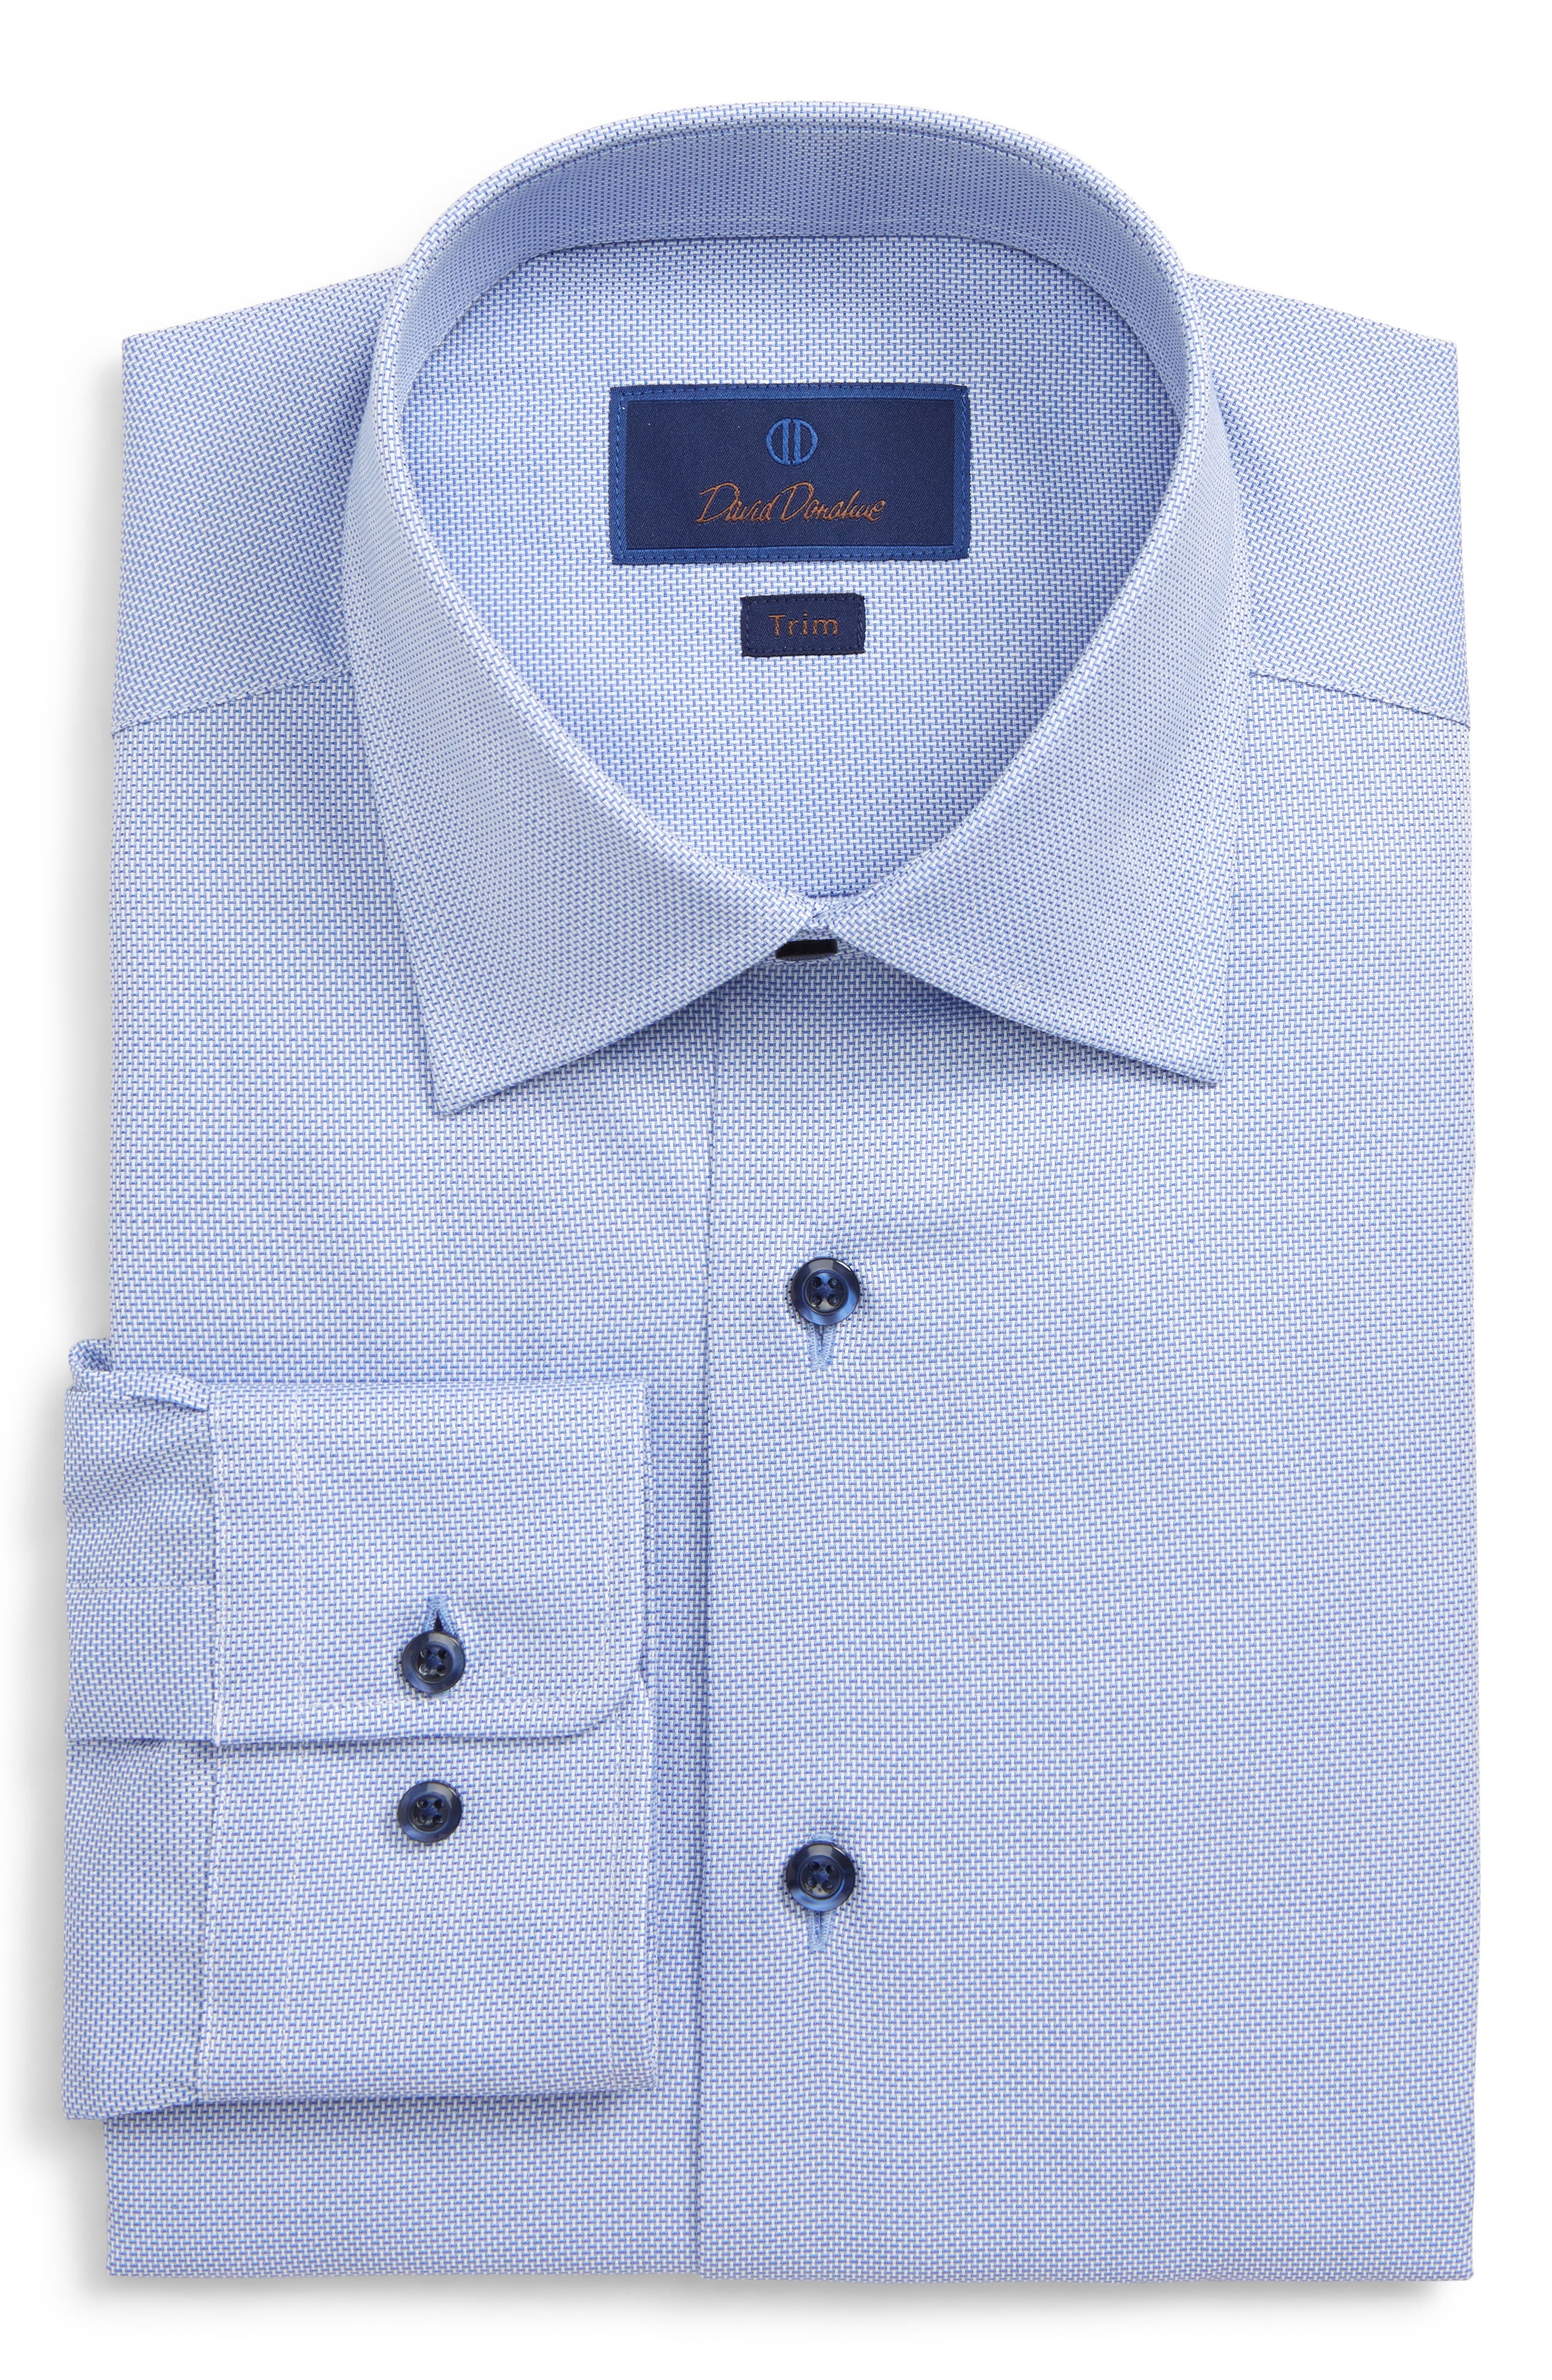 David Donahue Trim Fit Solid Dress Shirt In Blue At Nordstrom, Size 18.5 - 36